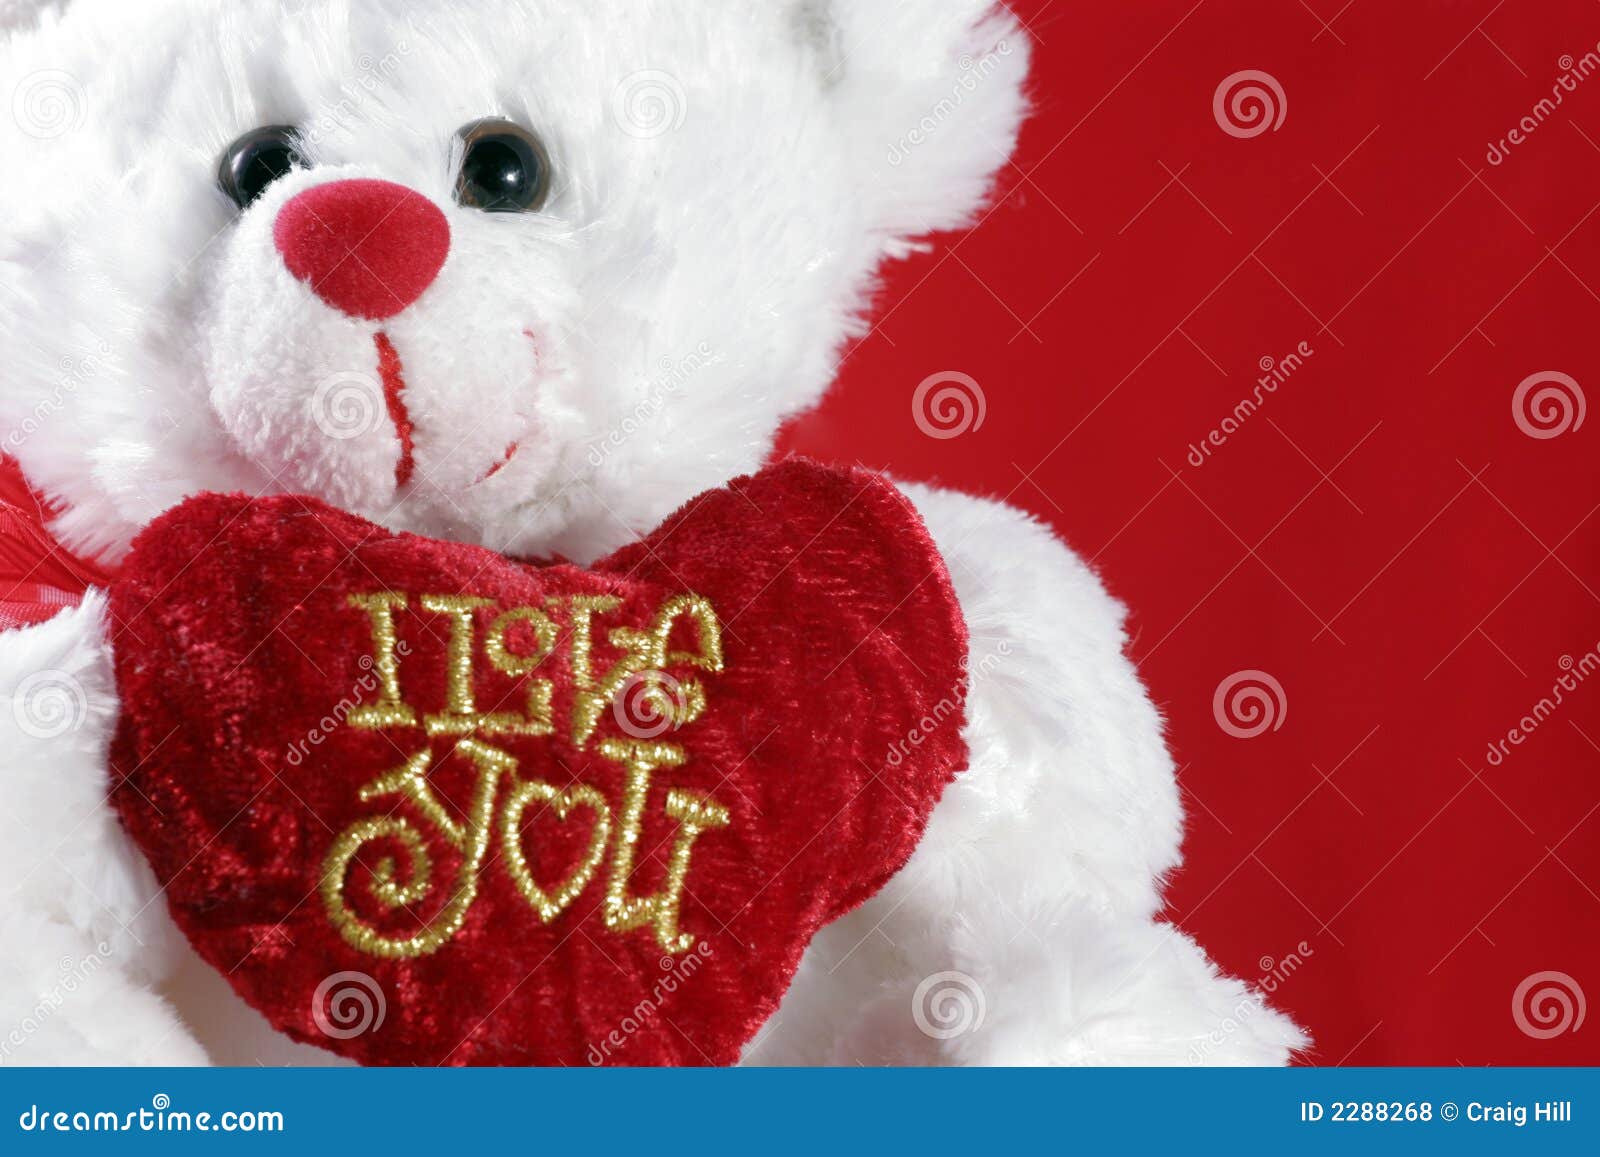 Unmatched Collection of Over 999 Teddy Bear Images with Love in ...